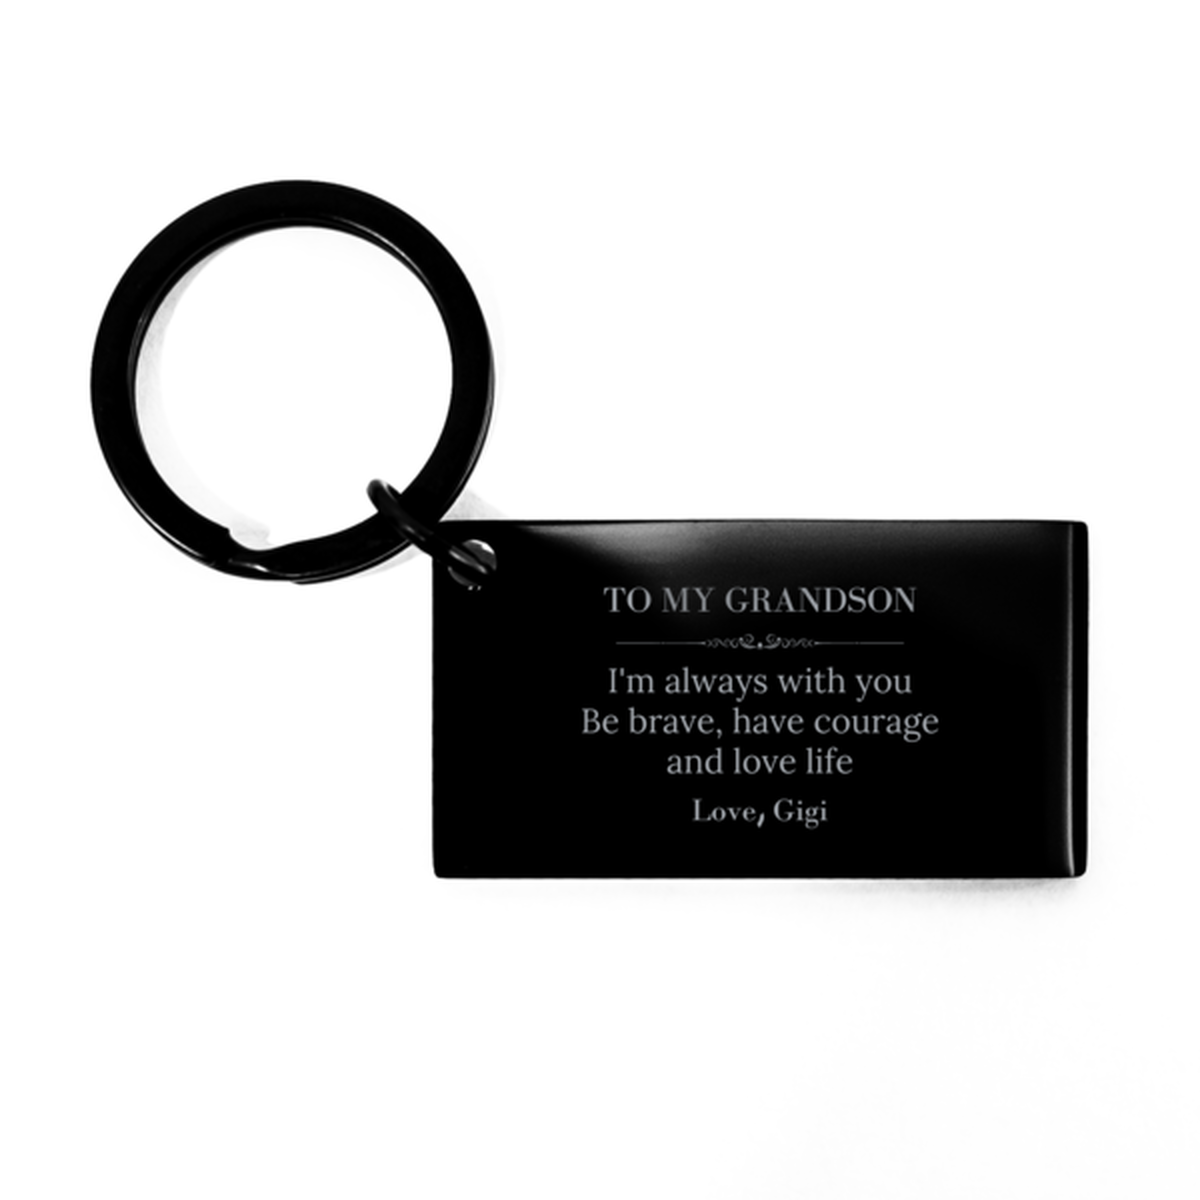 To My Grandson Gifts from Gigi, Unique Keychain Inspirational Christmas Birthday Graduation Gifts for Grandson I'm always with you. Be brave, have courage and love life. Love, Gigi